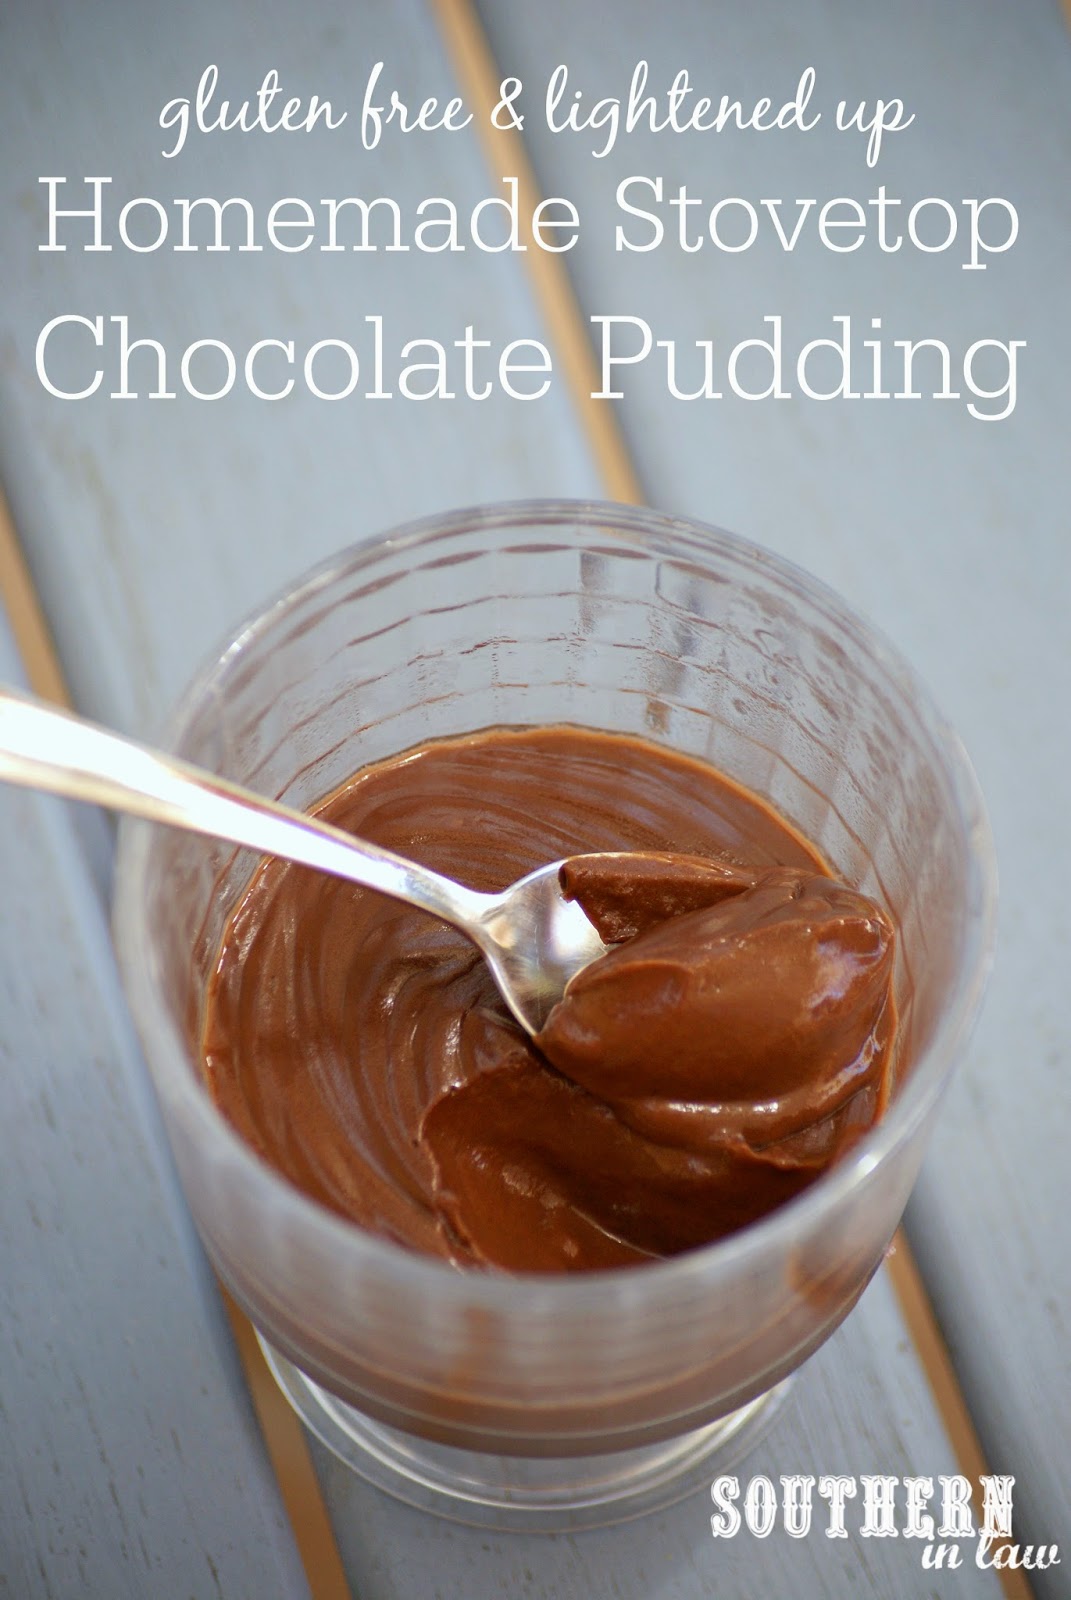 Low Fat Chocolate Pudding Recipe Made From Scratch - low fat, gluten free, clean eating friendly, refined sugar free - Healthy Egg Yolk Recipes